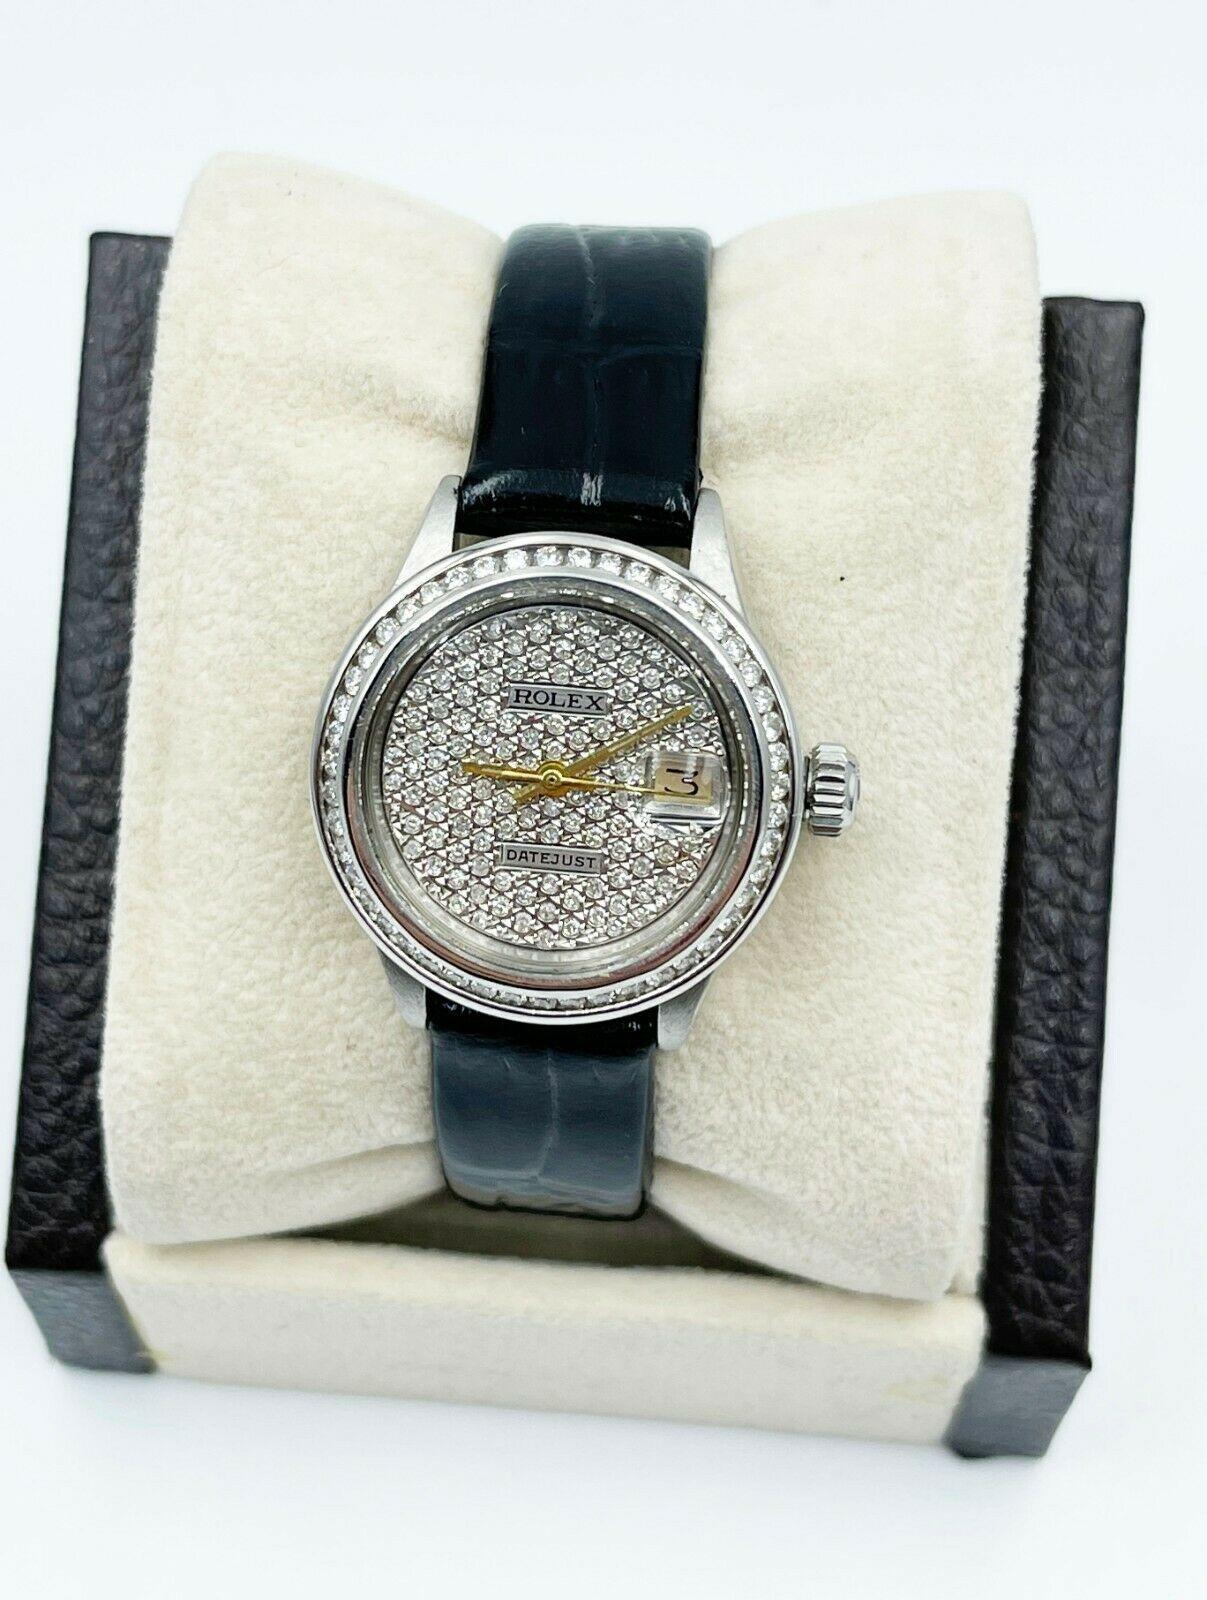 Style Number: 6917

 

Serial: 3137***

 

Model: Ladies Datejust

 

Case Material: Stainless Steel

 

Band: Custom Leather Band 

 

Bezel: Custom Diamond Bezel 

 

Dial: Custom Diamond Dial 

 

Face: Acrylic 

 

Case Size: 26mm

 

Includes: